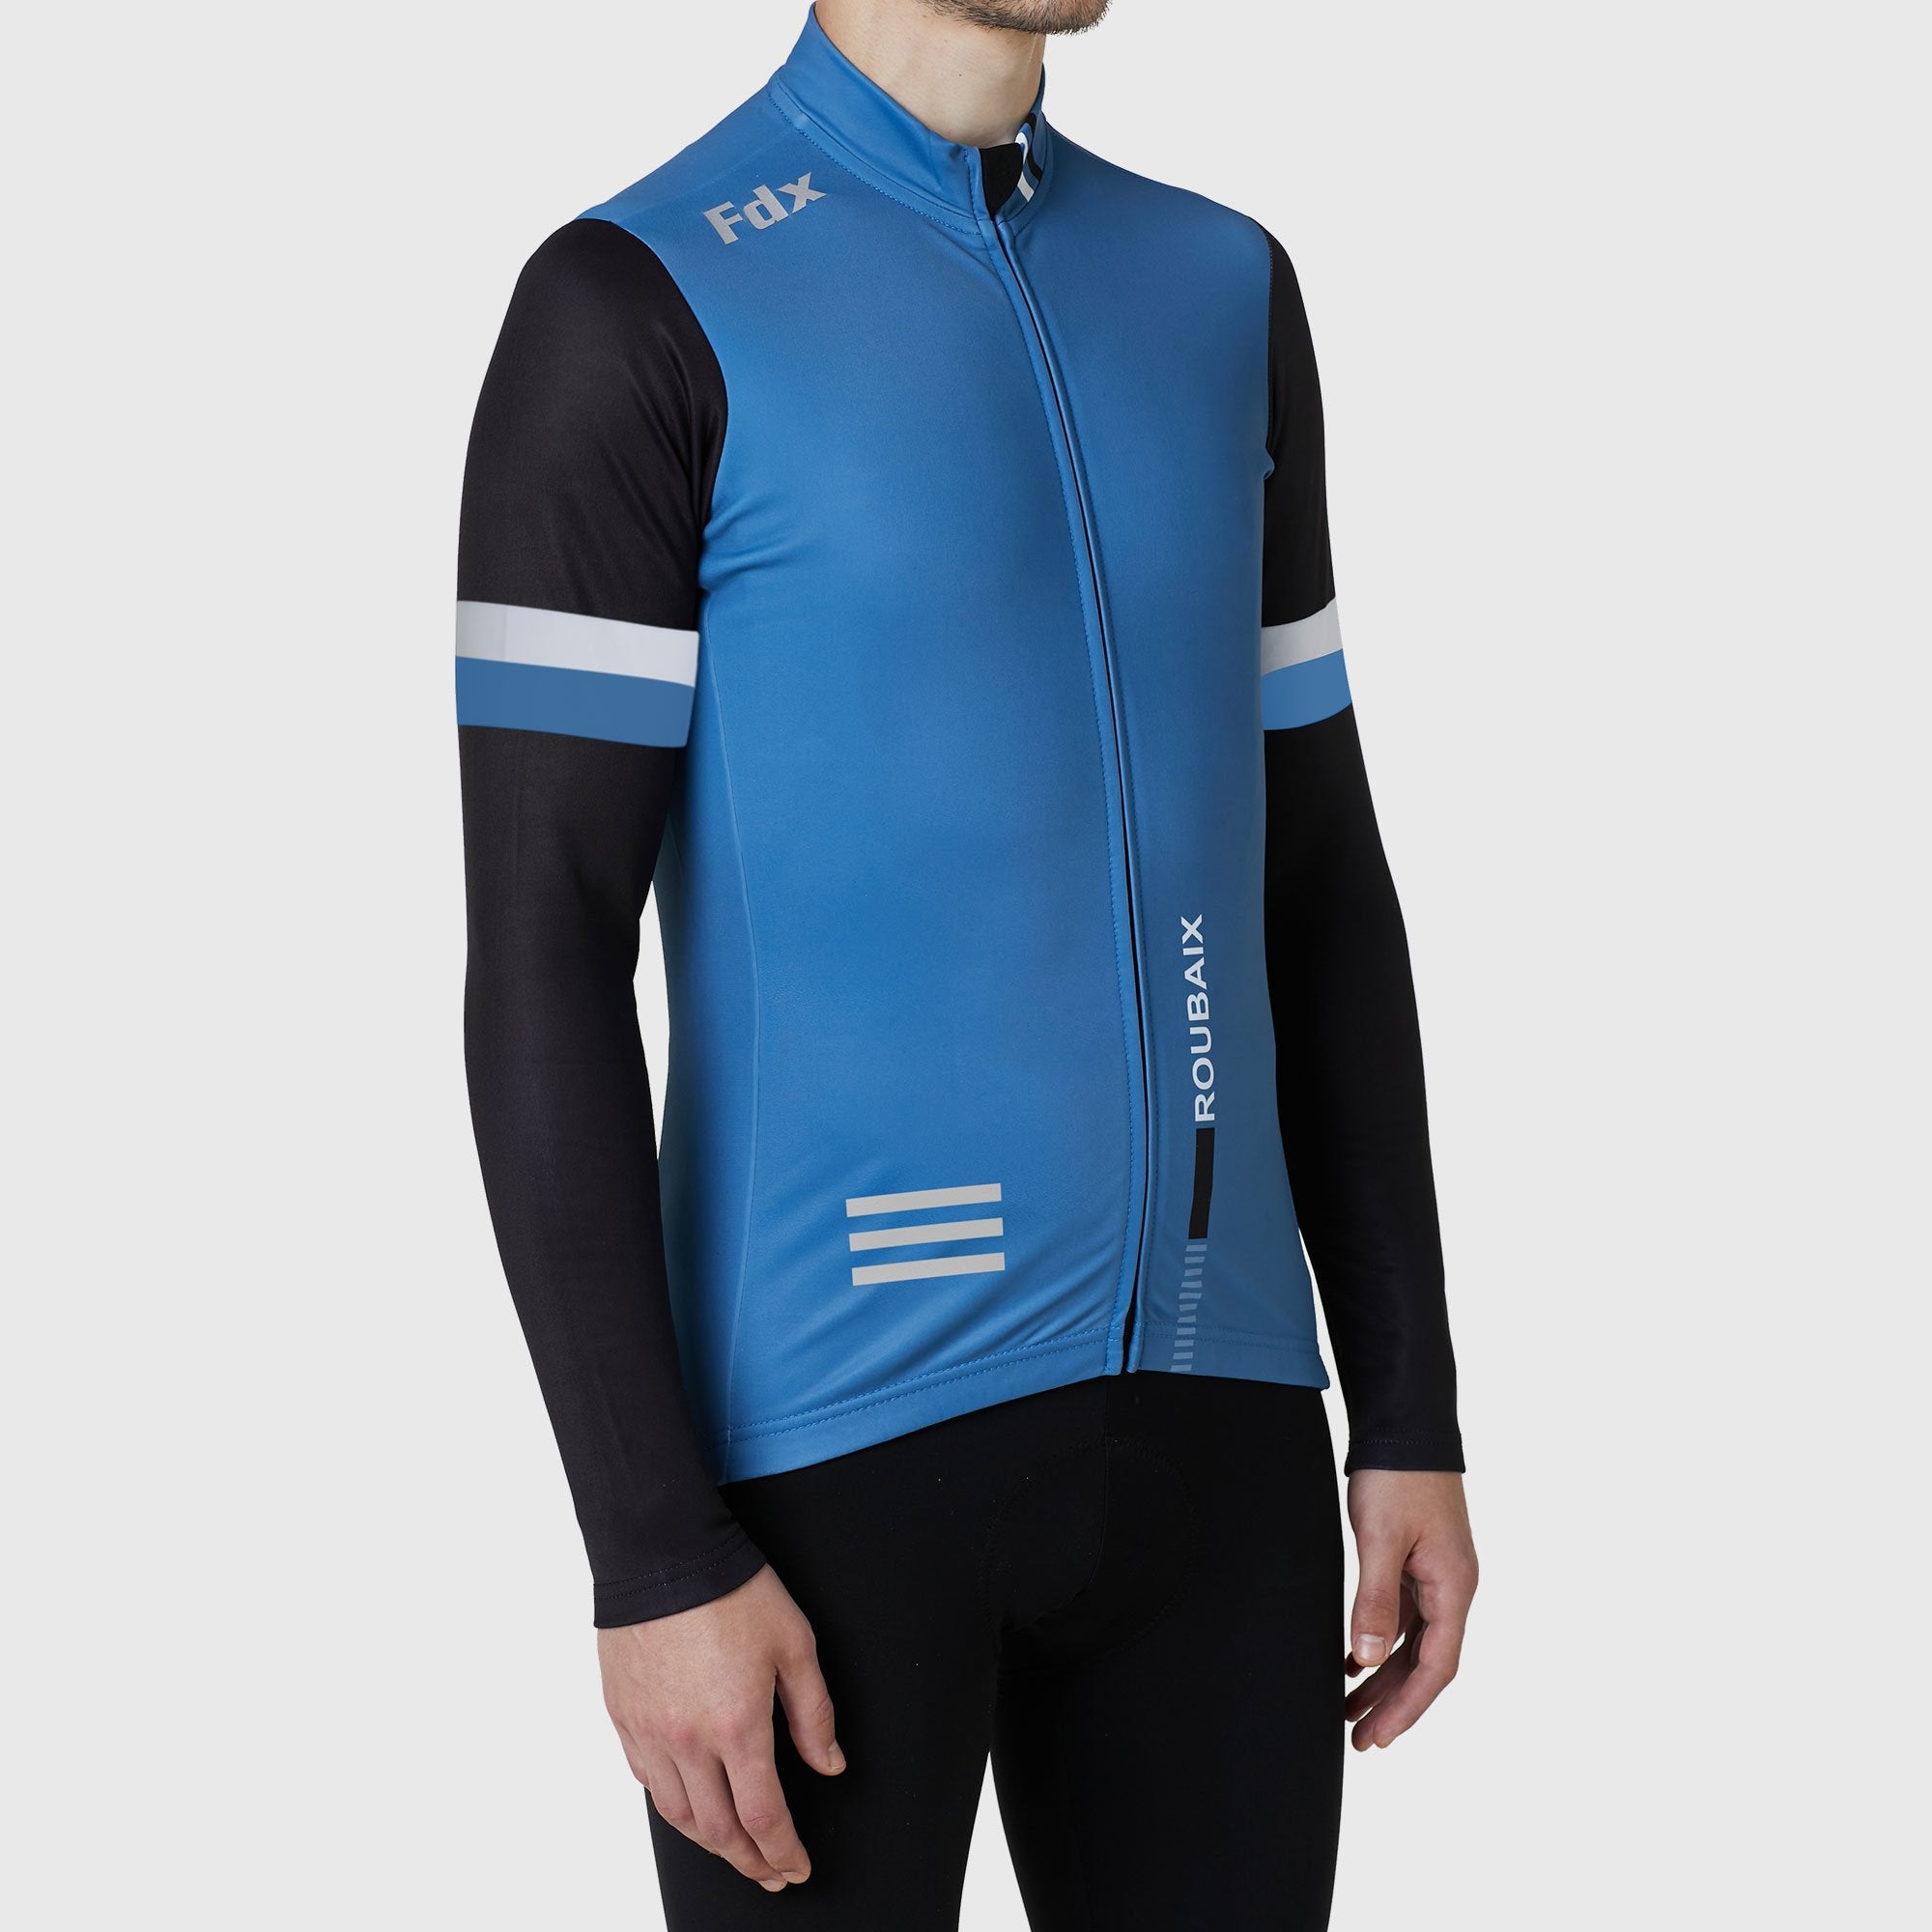 Fdx Limited Edition Blue Men's Long Sleeve Thermal Cycling Jersey | FDX  Sports® - FDX Sports US